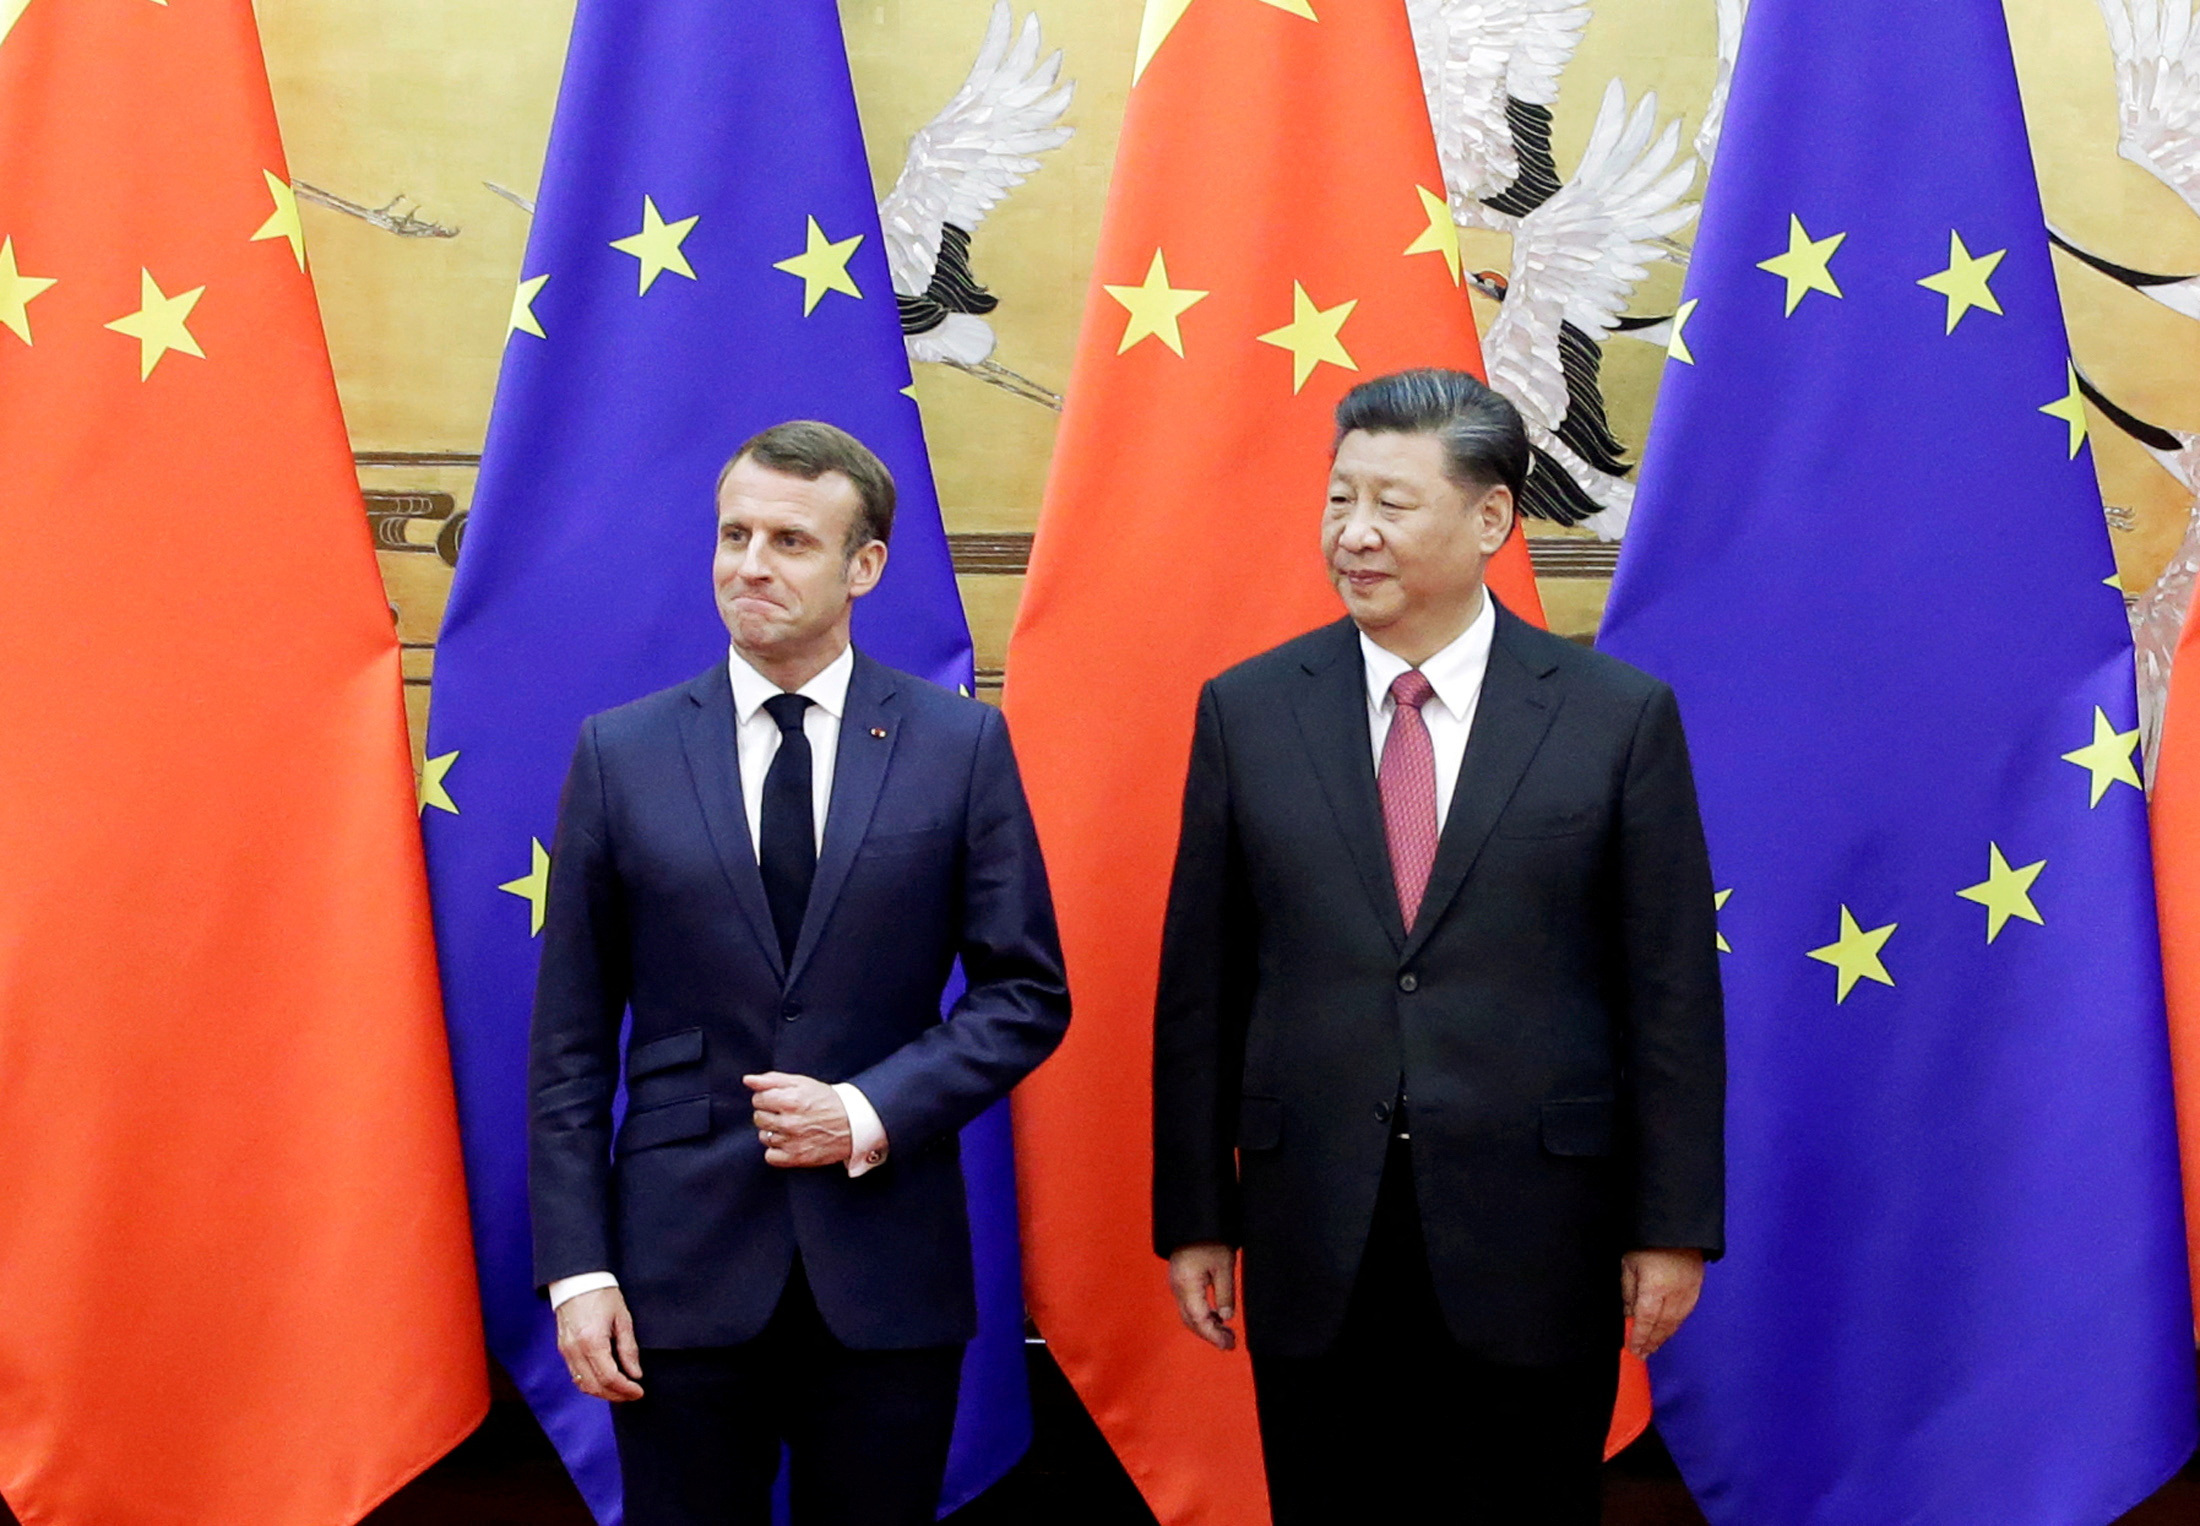 Chinese President Xi Jinping and French President Emmanuel Macron stand in front of Chinese and EU flags at a signing ceremony inside the Great Hall of the People in Beijing